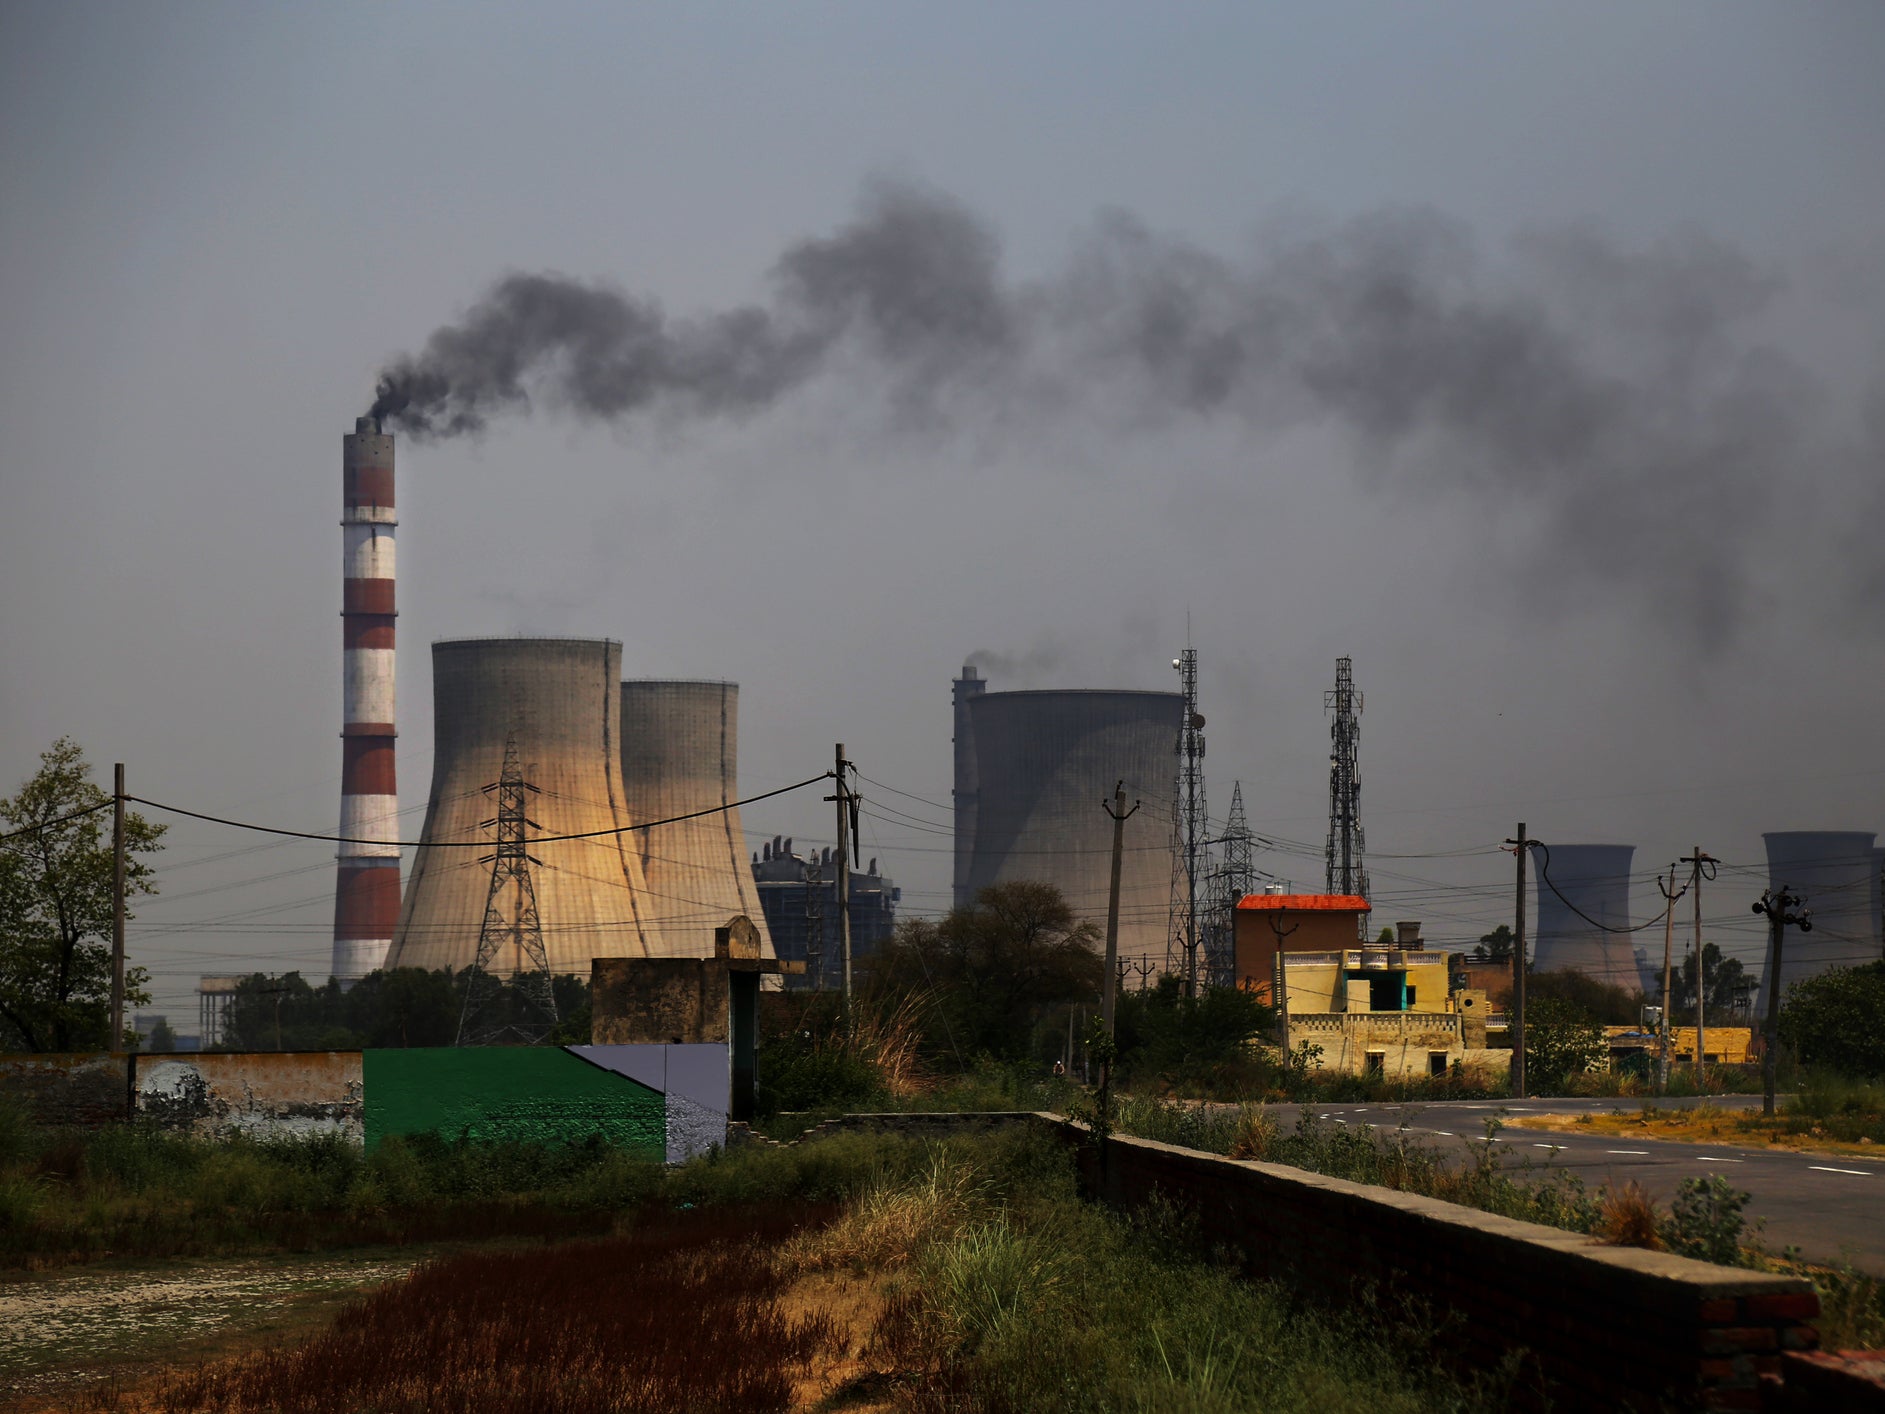 Asia's growing coal use could negate global climate change progress, UN says - The Independent